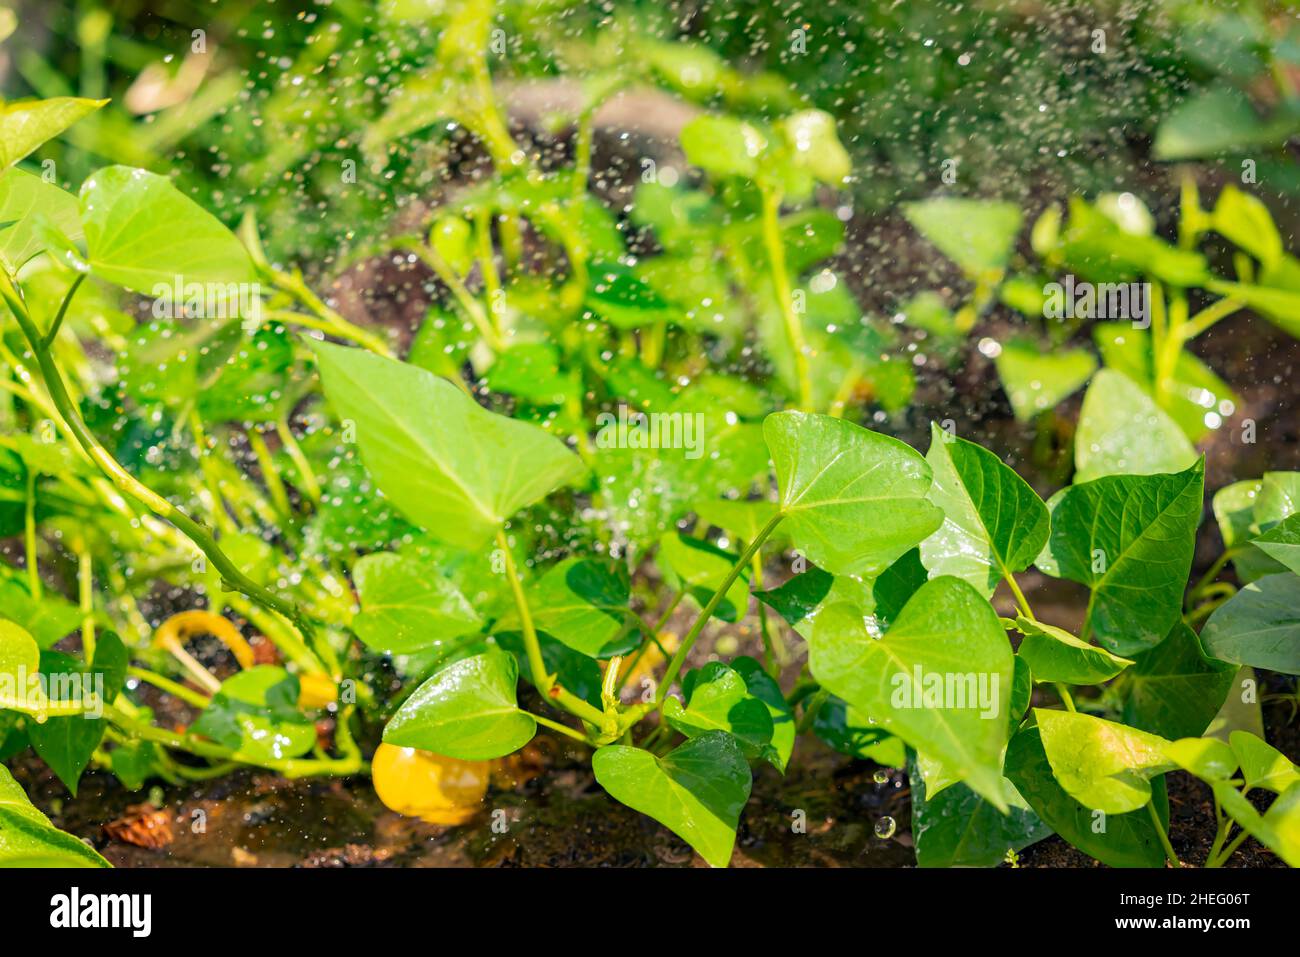 Growing Sweet potato leaves in farm garden at Los Angeles Stock Photo